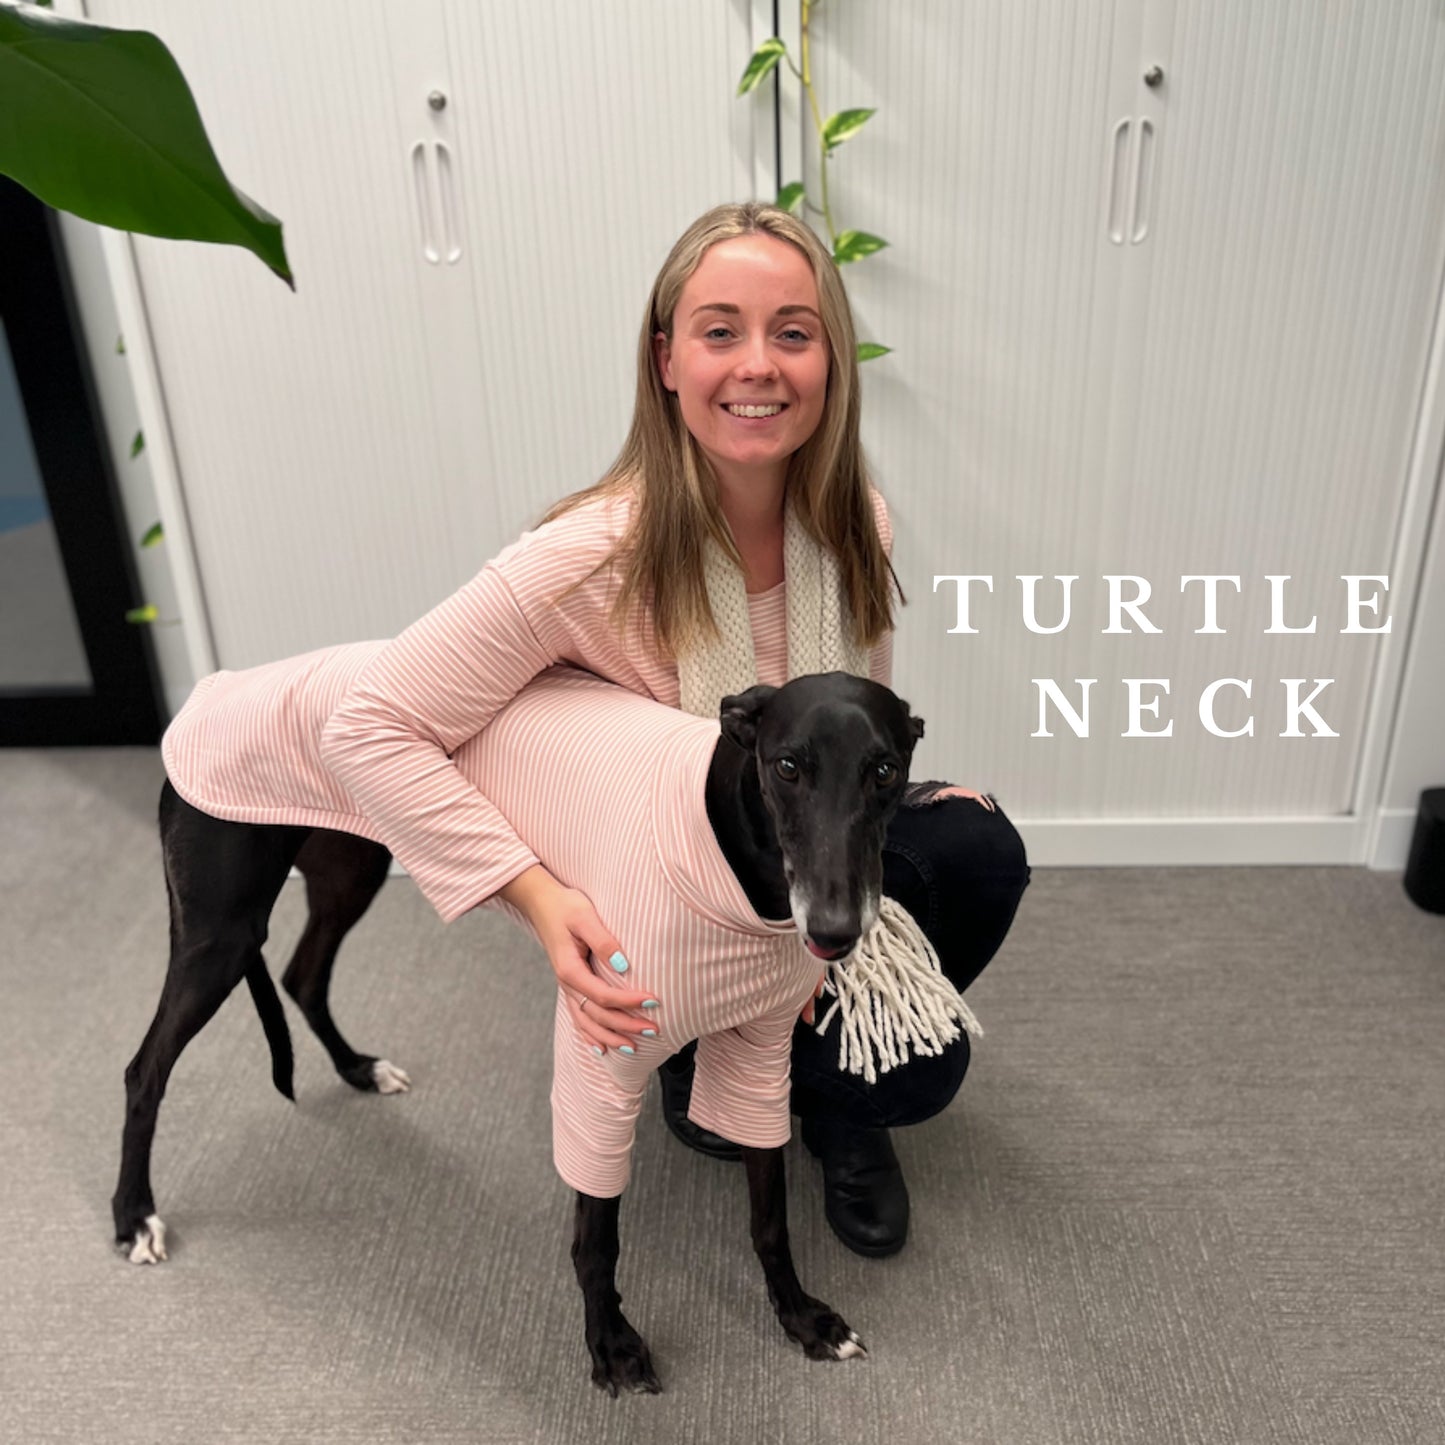 SMALL Dog Turtle Neck T-shirt (1-3)